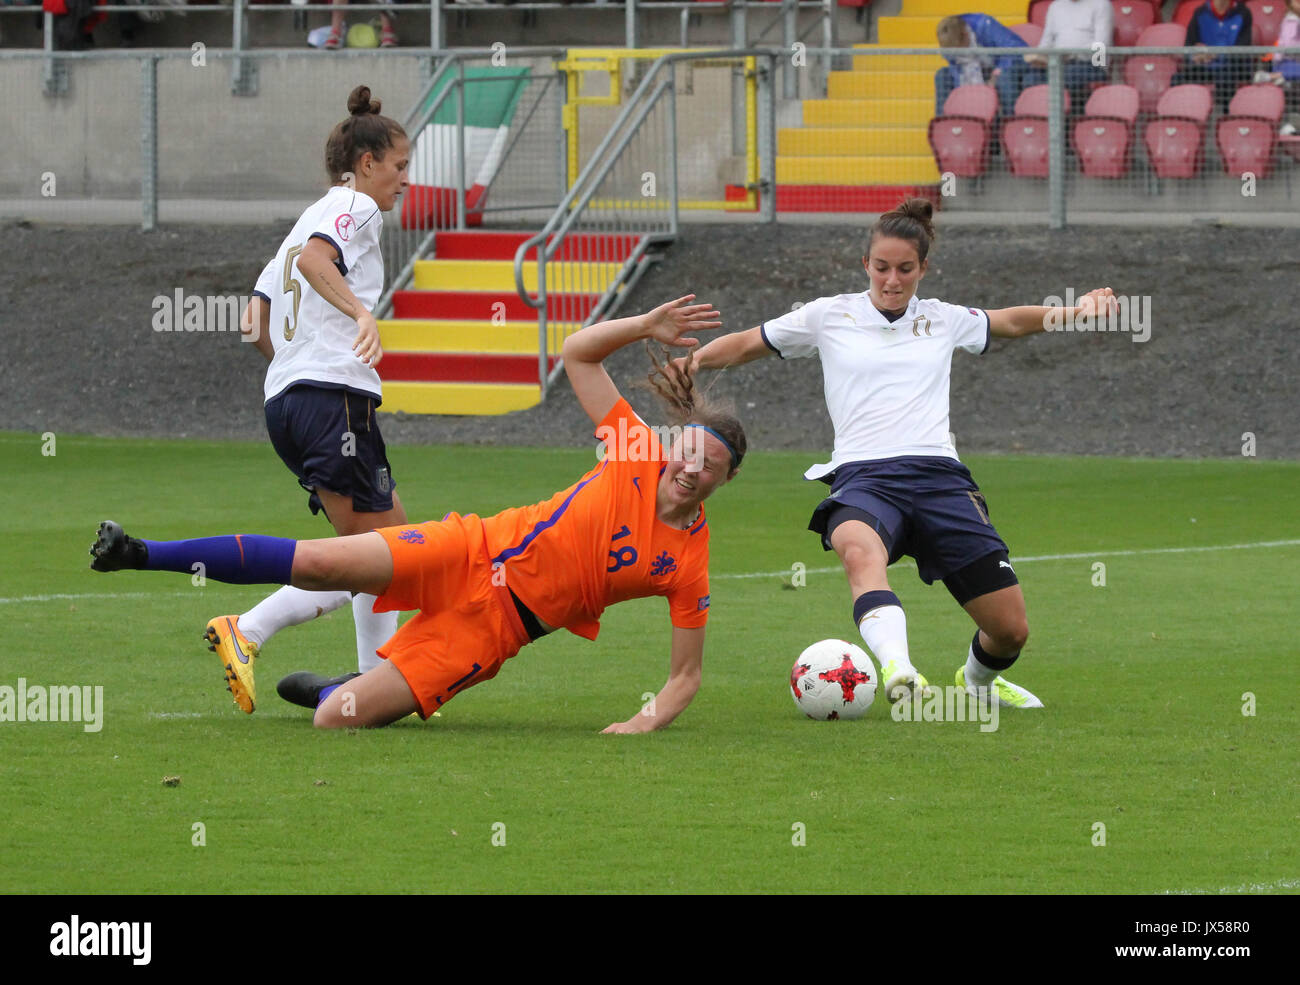 Shamrock Park, Portadown, Northern Ireland. 14 August 2017. UEFA Women's Under-19 Championship Group B – Netherlands v Italy. Penalty - as Fenna Kalma is fouled by Italy's Alice Tortelli. Credit: David Hunter/Alamy Live News. Stock Photo